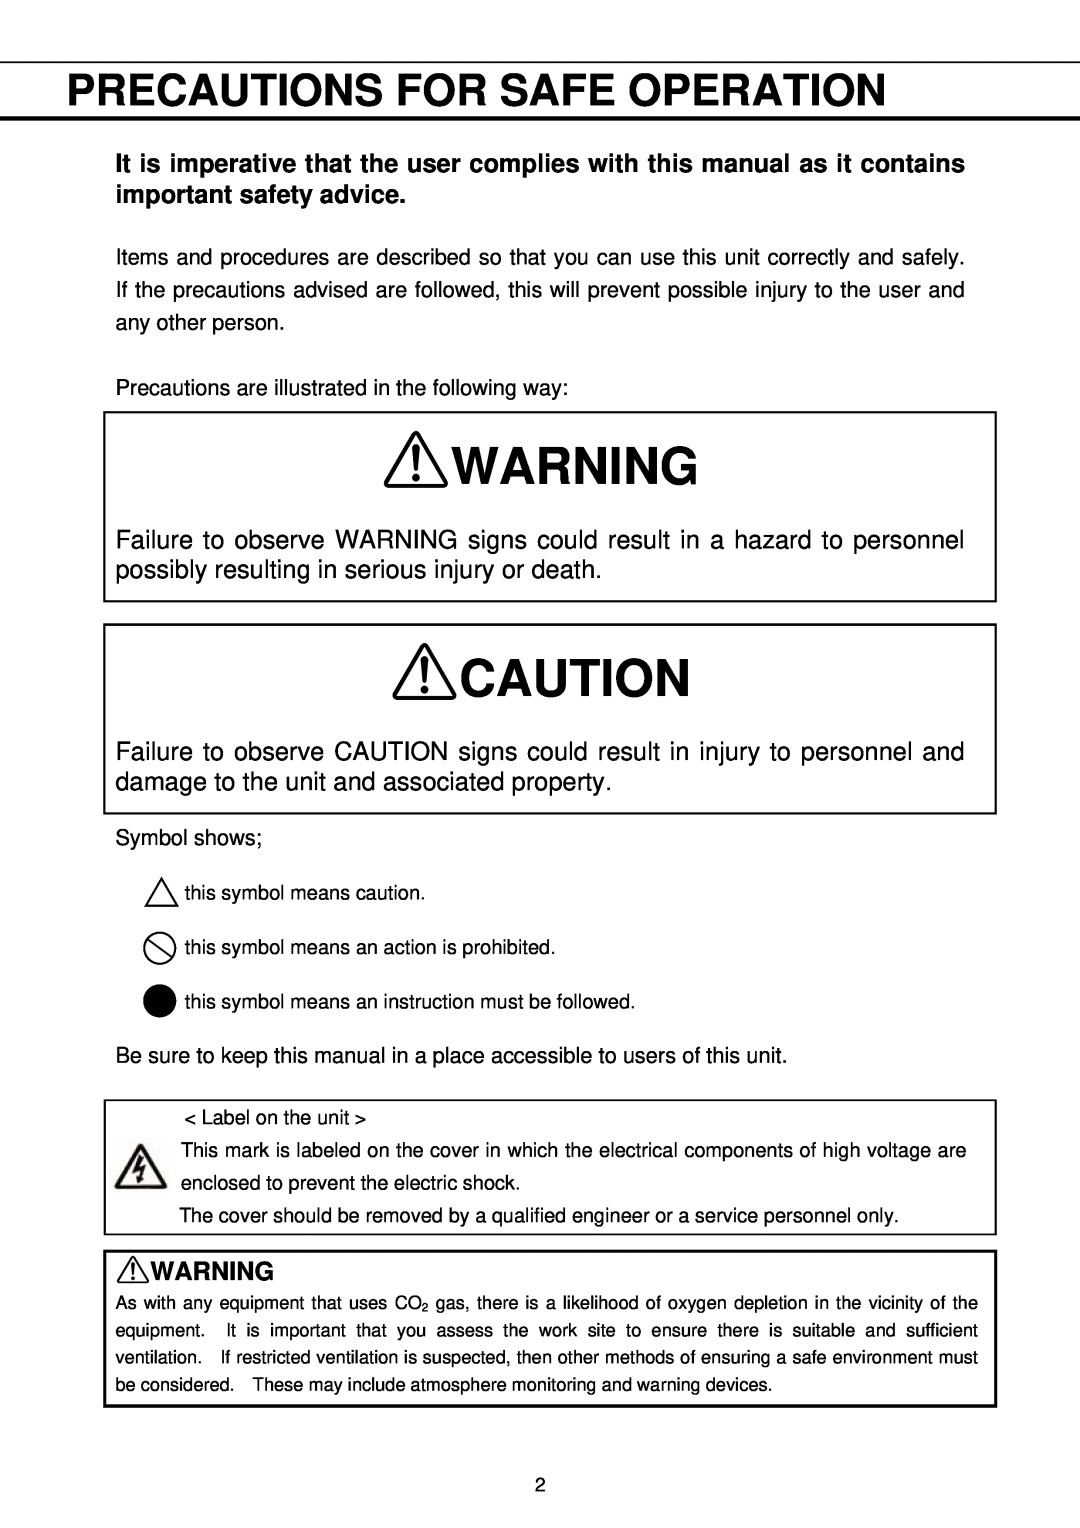 Sanyo MDF-U32V Precautions For Safe Operation, Precautions are illustrated in the following way, Symbol shows 